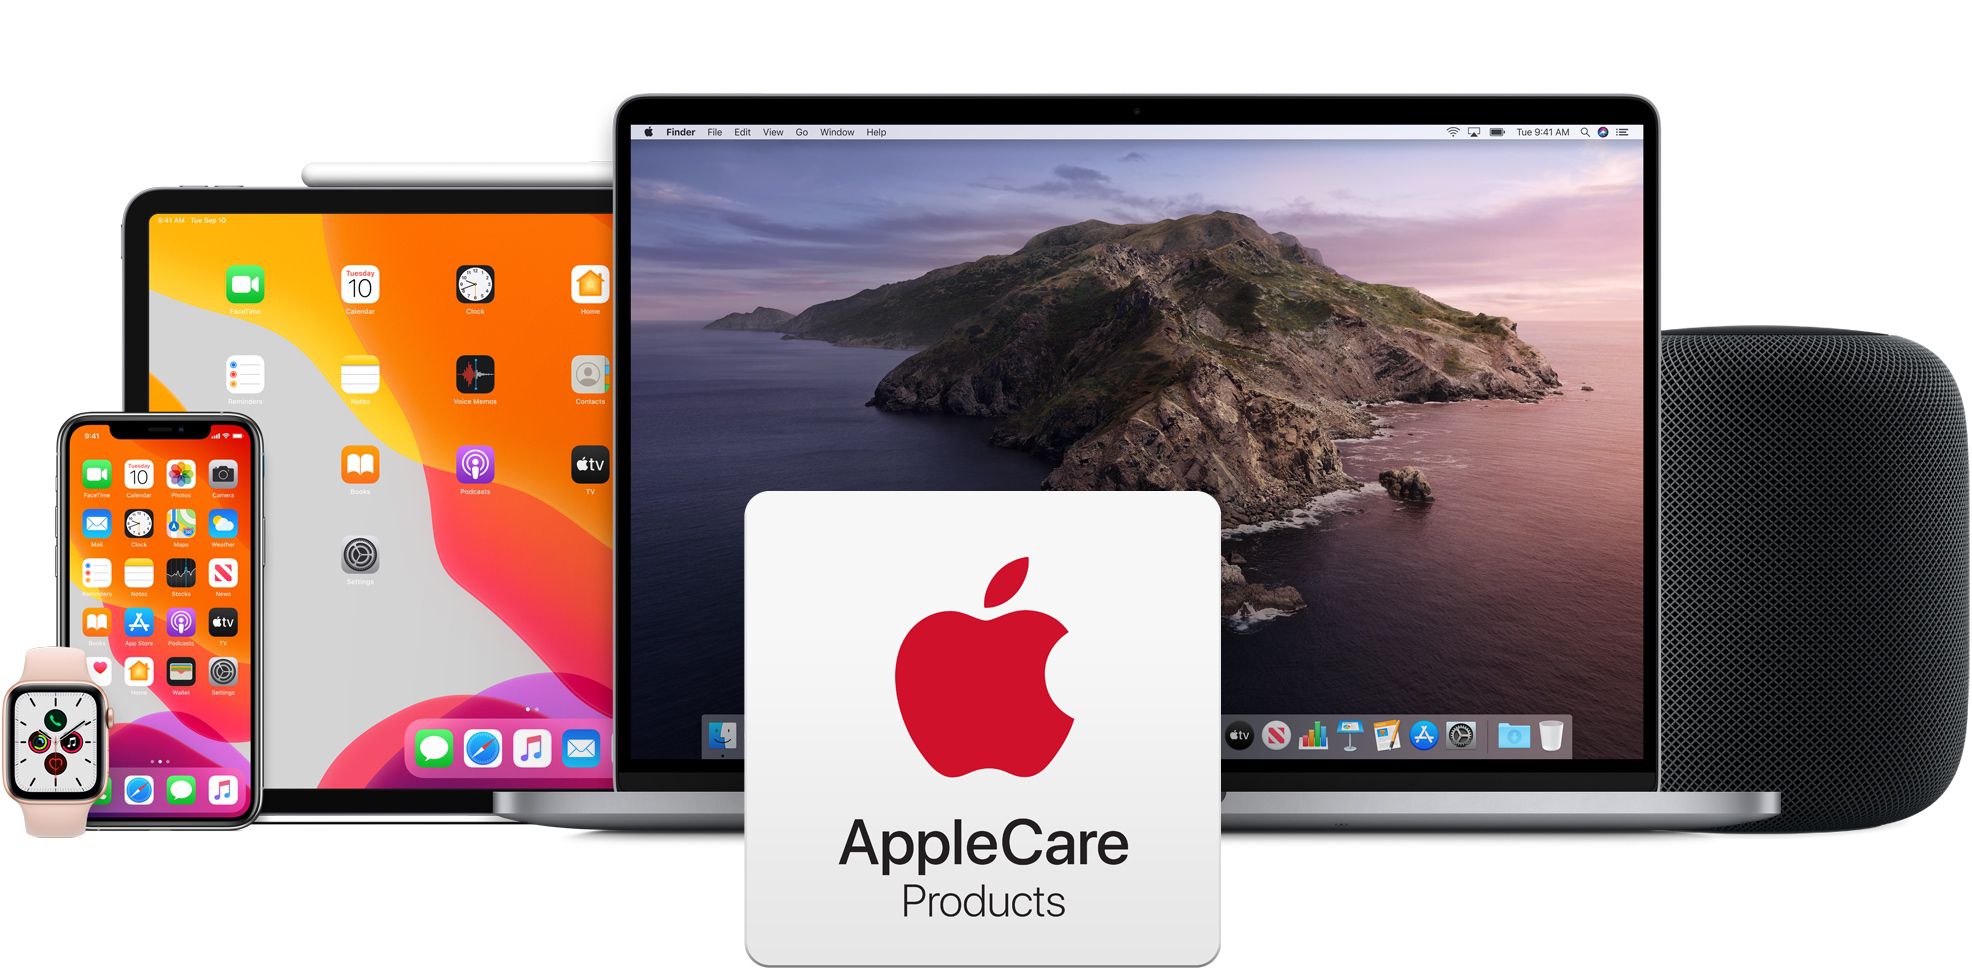 is it worth getting applecare for macbook air